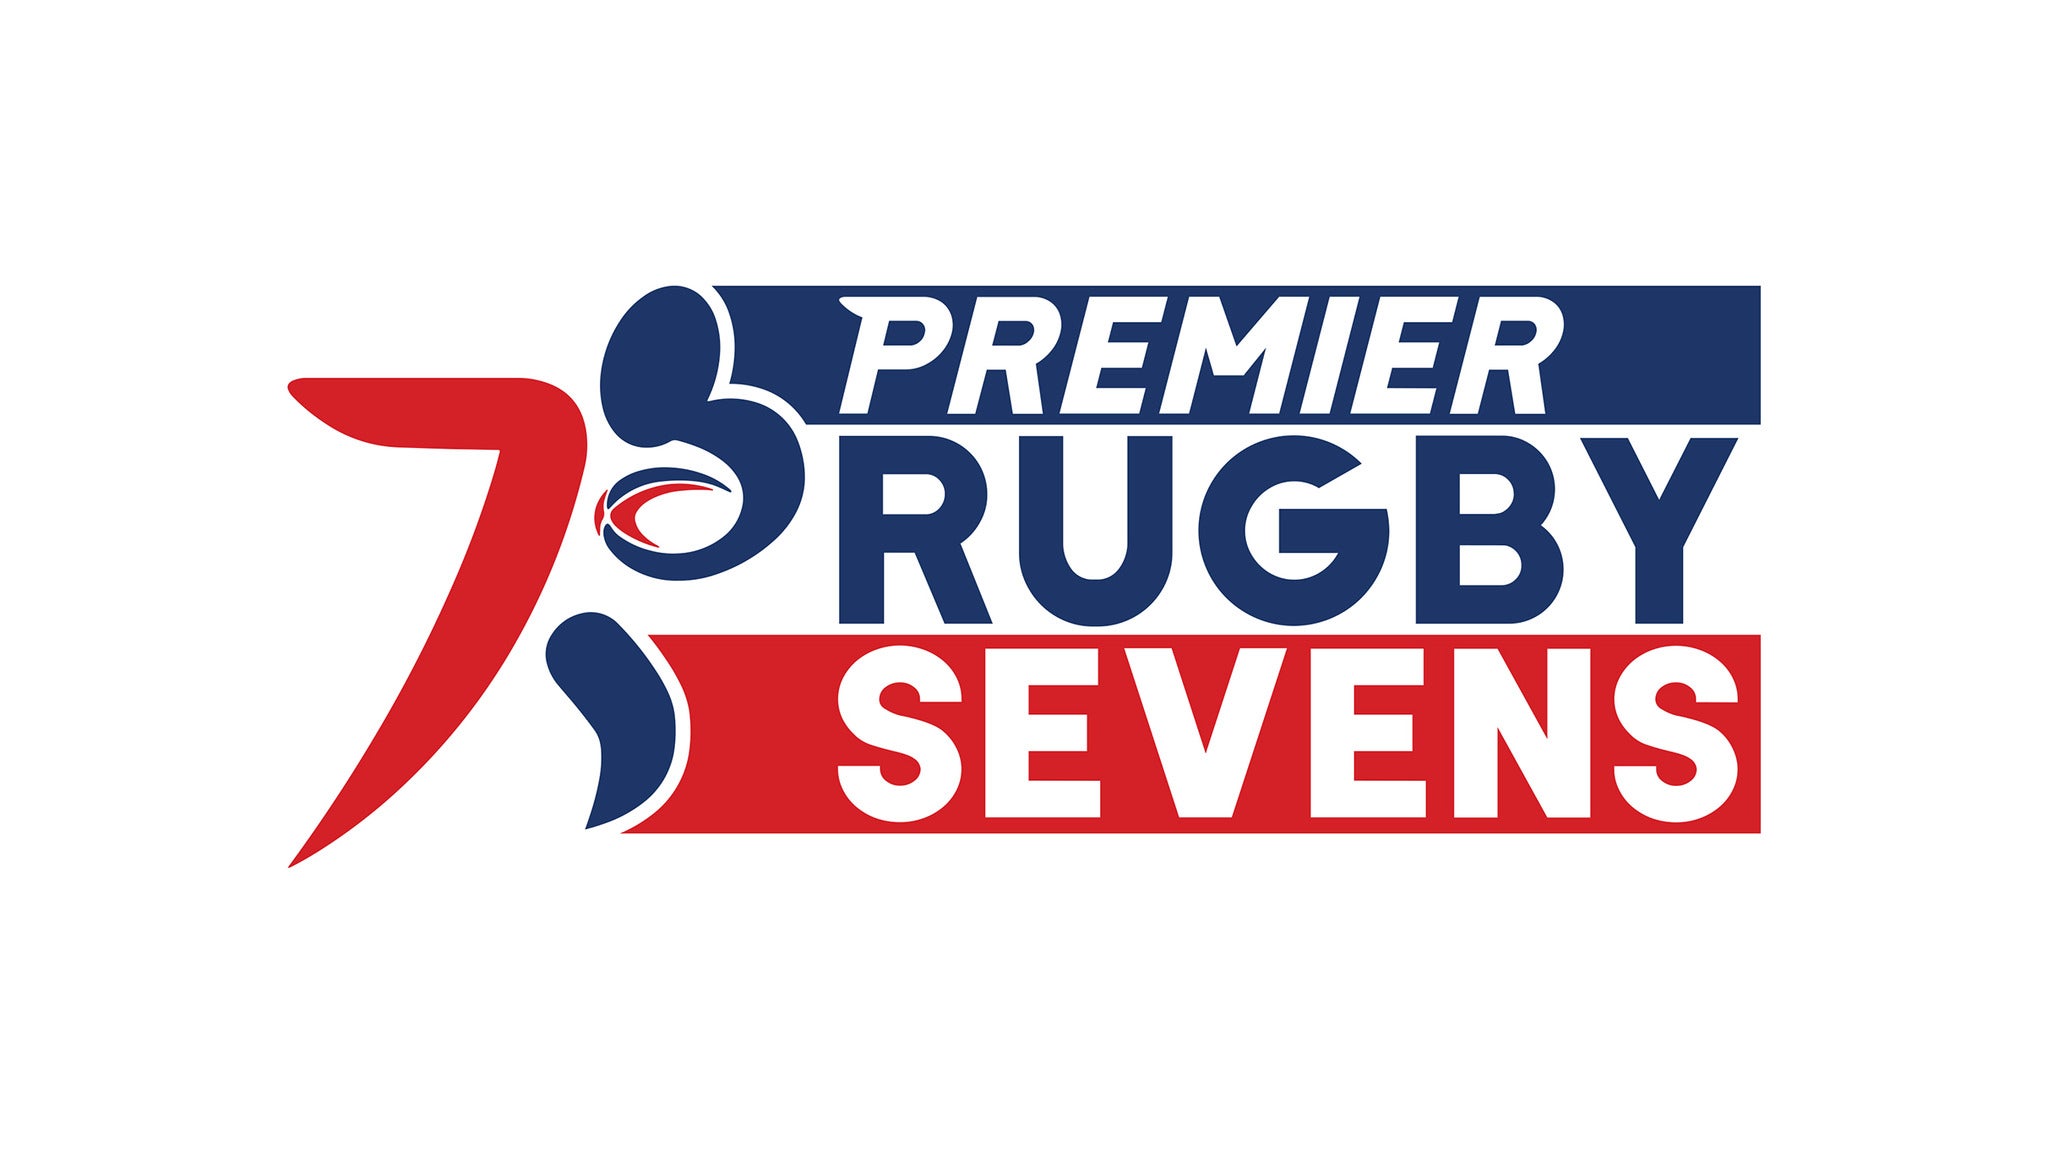 Premier Rugby Sevens: The Bay Area Tournament at PayPal Park